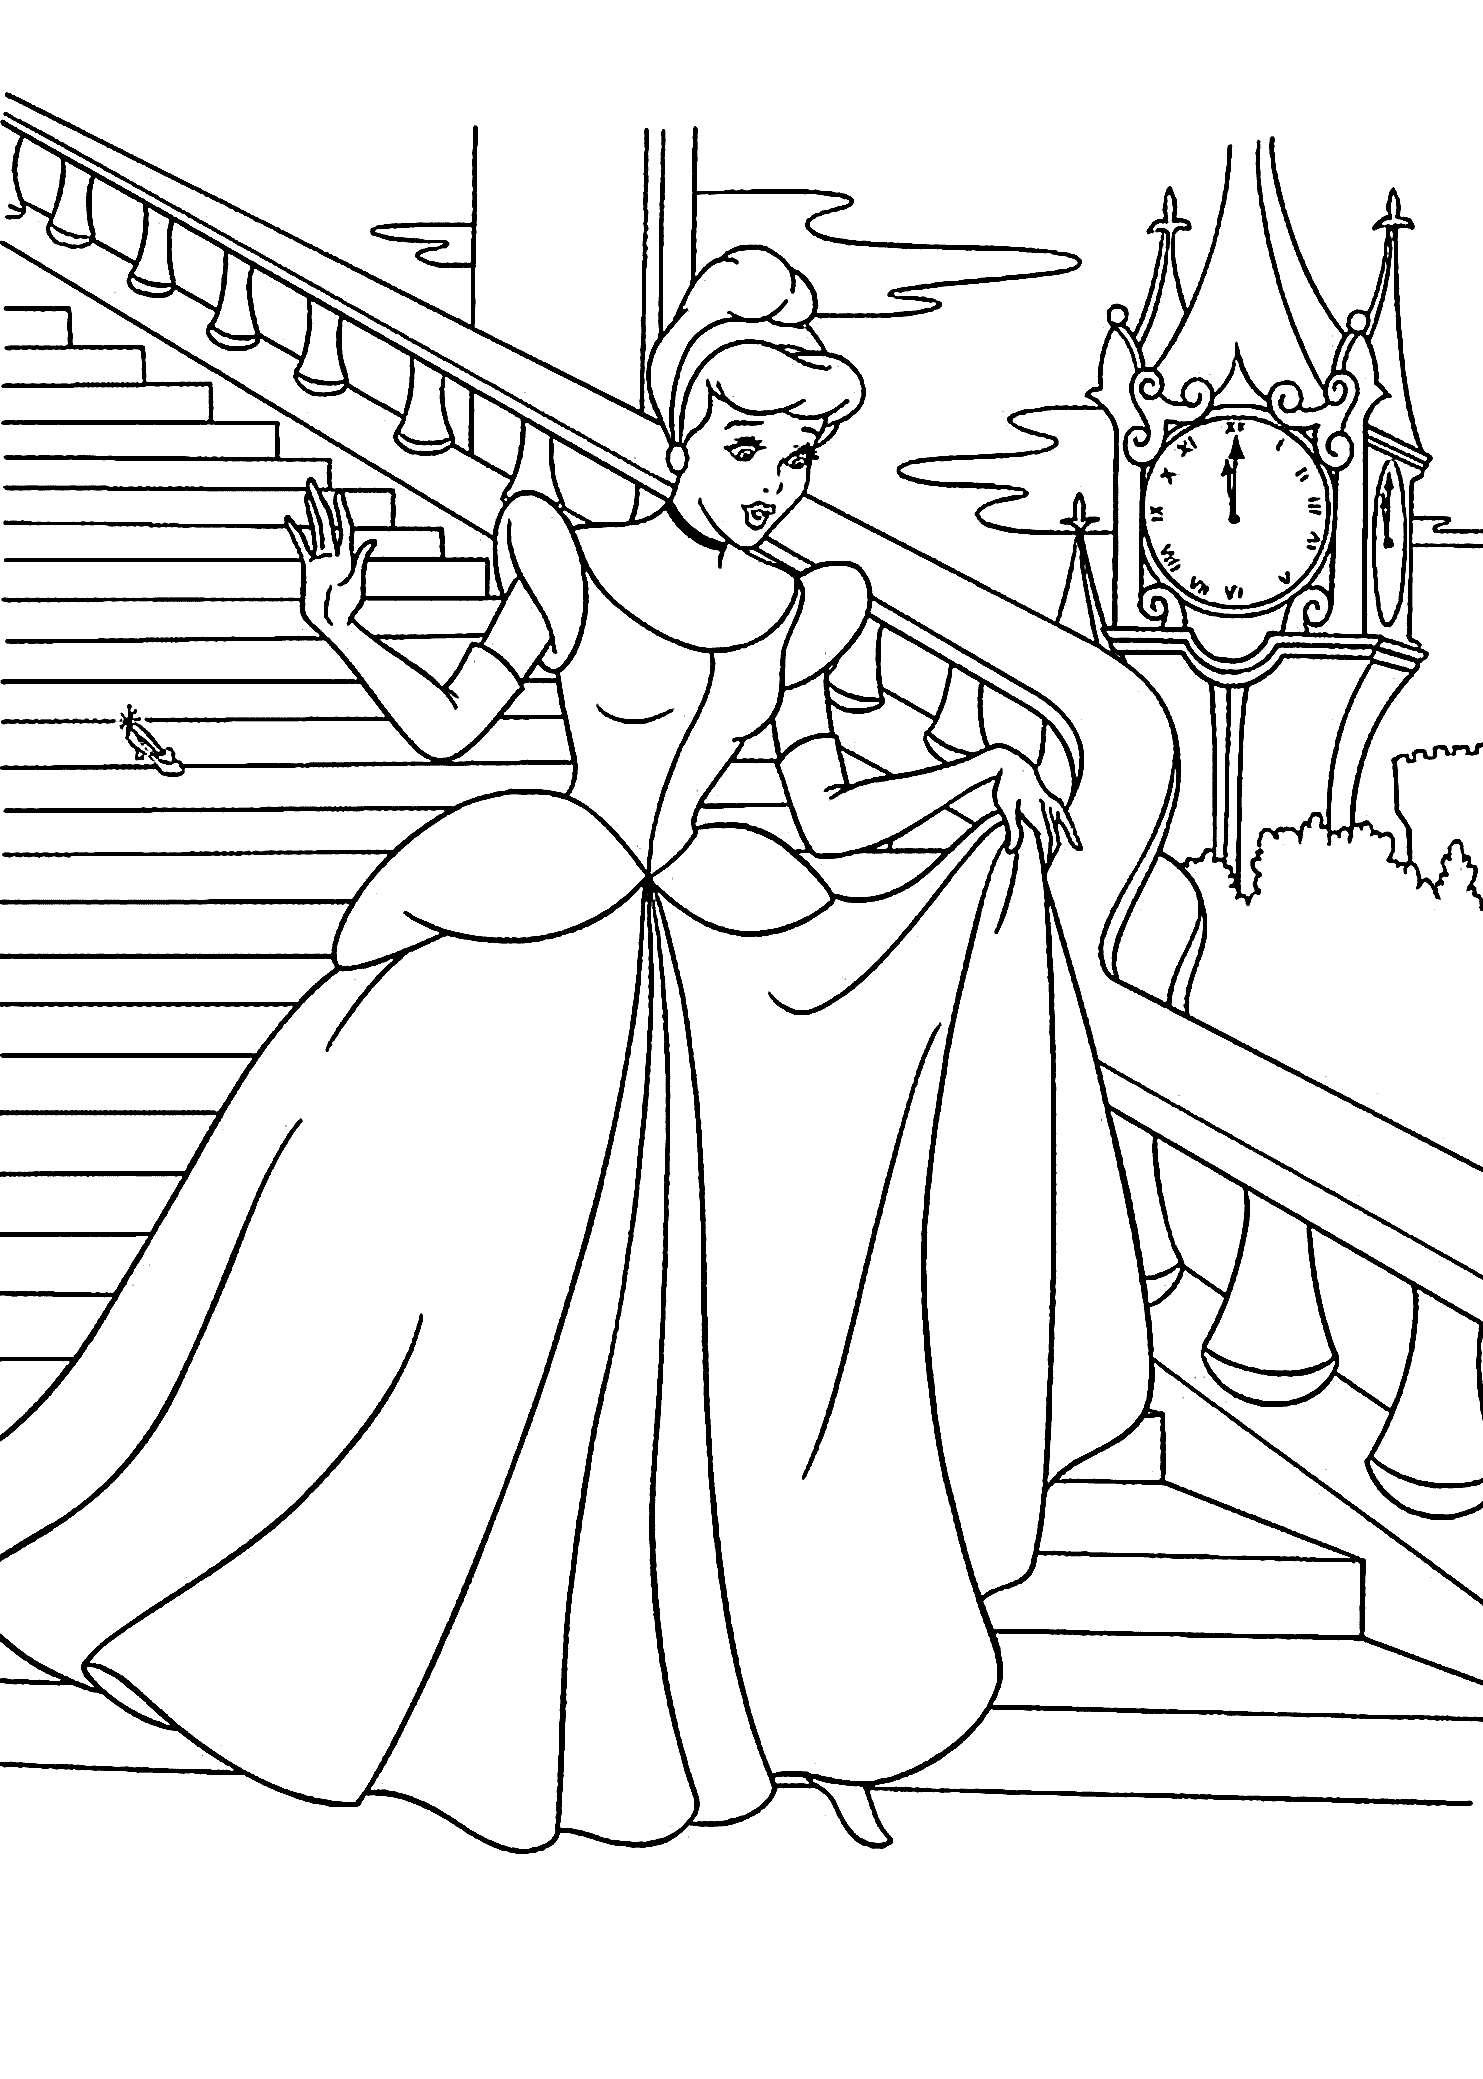 Free Cinderella Coloring Pages Awesome Design Cinderella Coloring Sheet At The Ball Pages For Kids